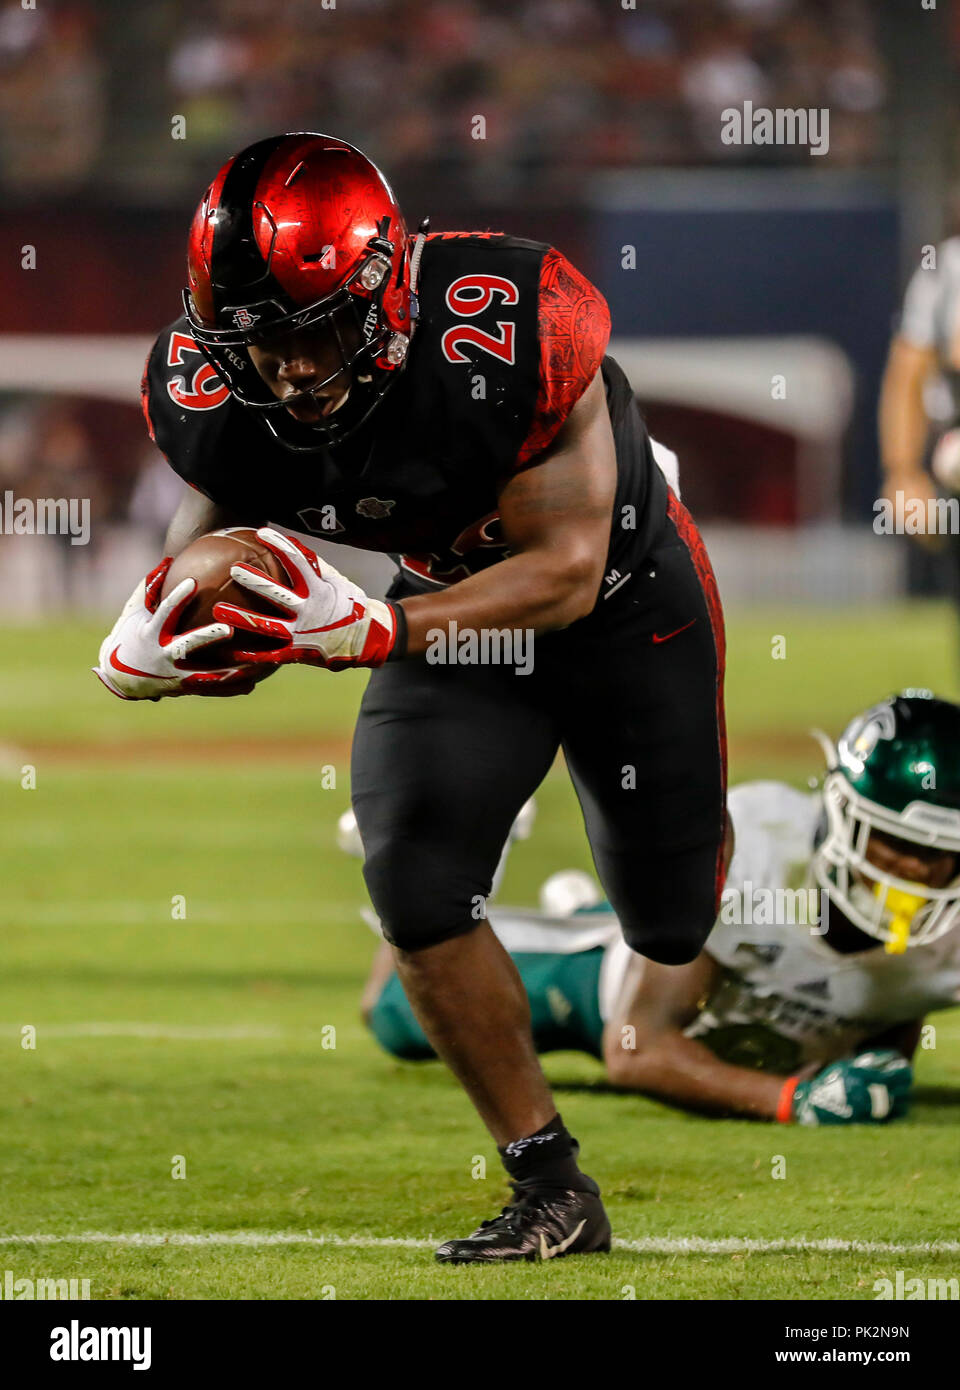 San Diego, California, USA. 8th Sep, 2018. San Diego State Aztecs running back Juwan Washington (29) runs 4 yards for the touchdown in the fourth quarter against the Sacramento State Hornets at SDCCU Stadium in San Diego, California. Michael Cazares/Cal Sport Media. Credit: csm/Alamy Live News Stock Photo